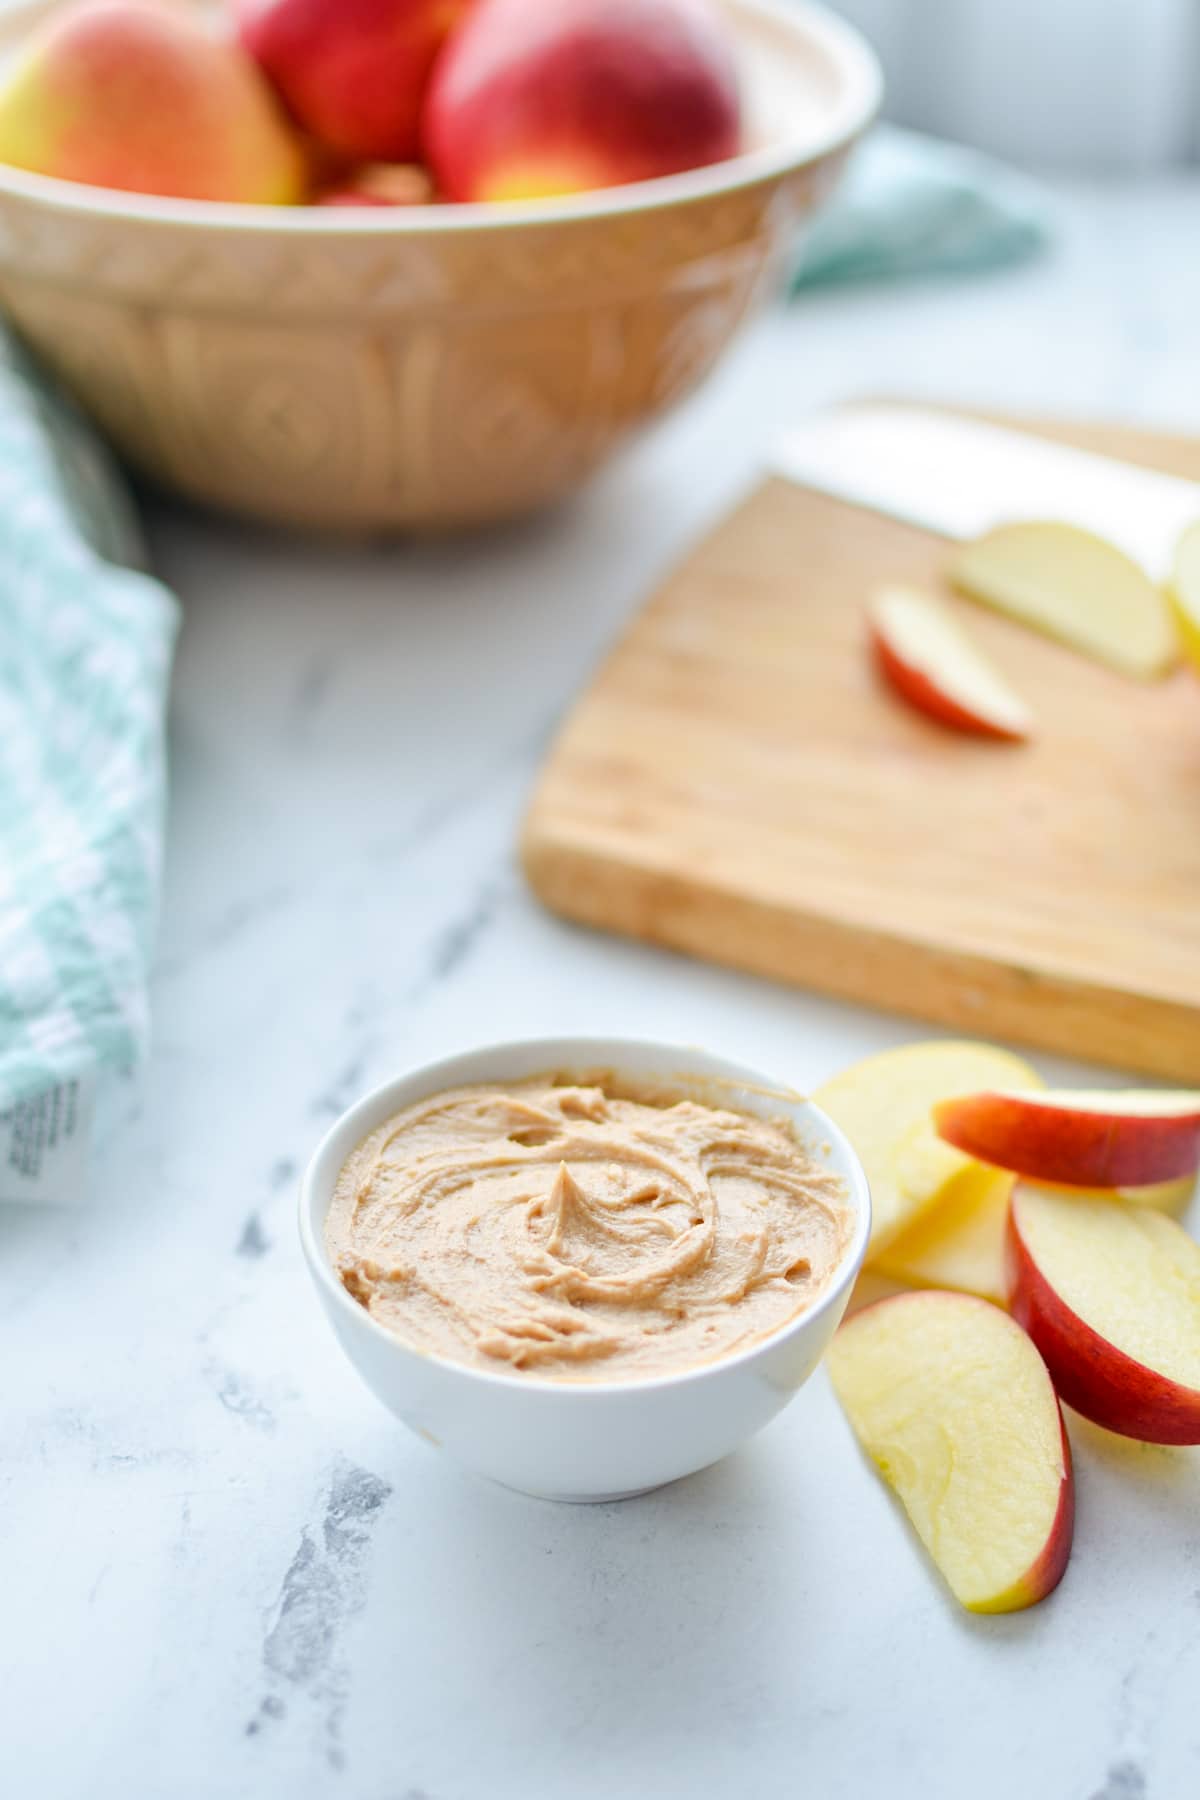 A small bowl of peanut butter yogurt dip, with sliced apples in the foreground and a bowl in the background.